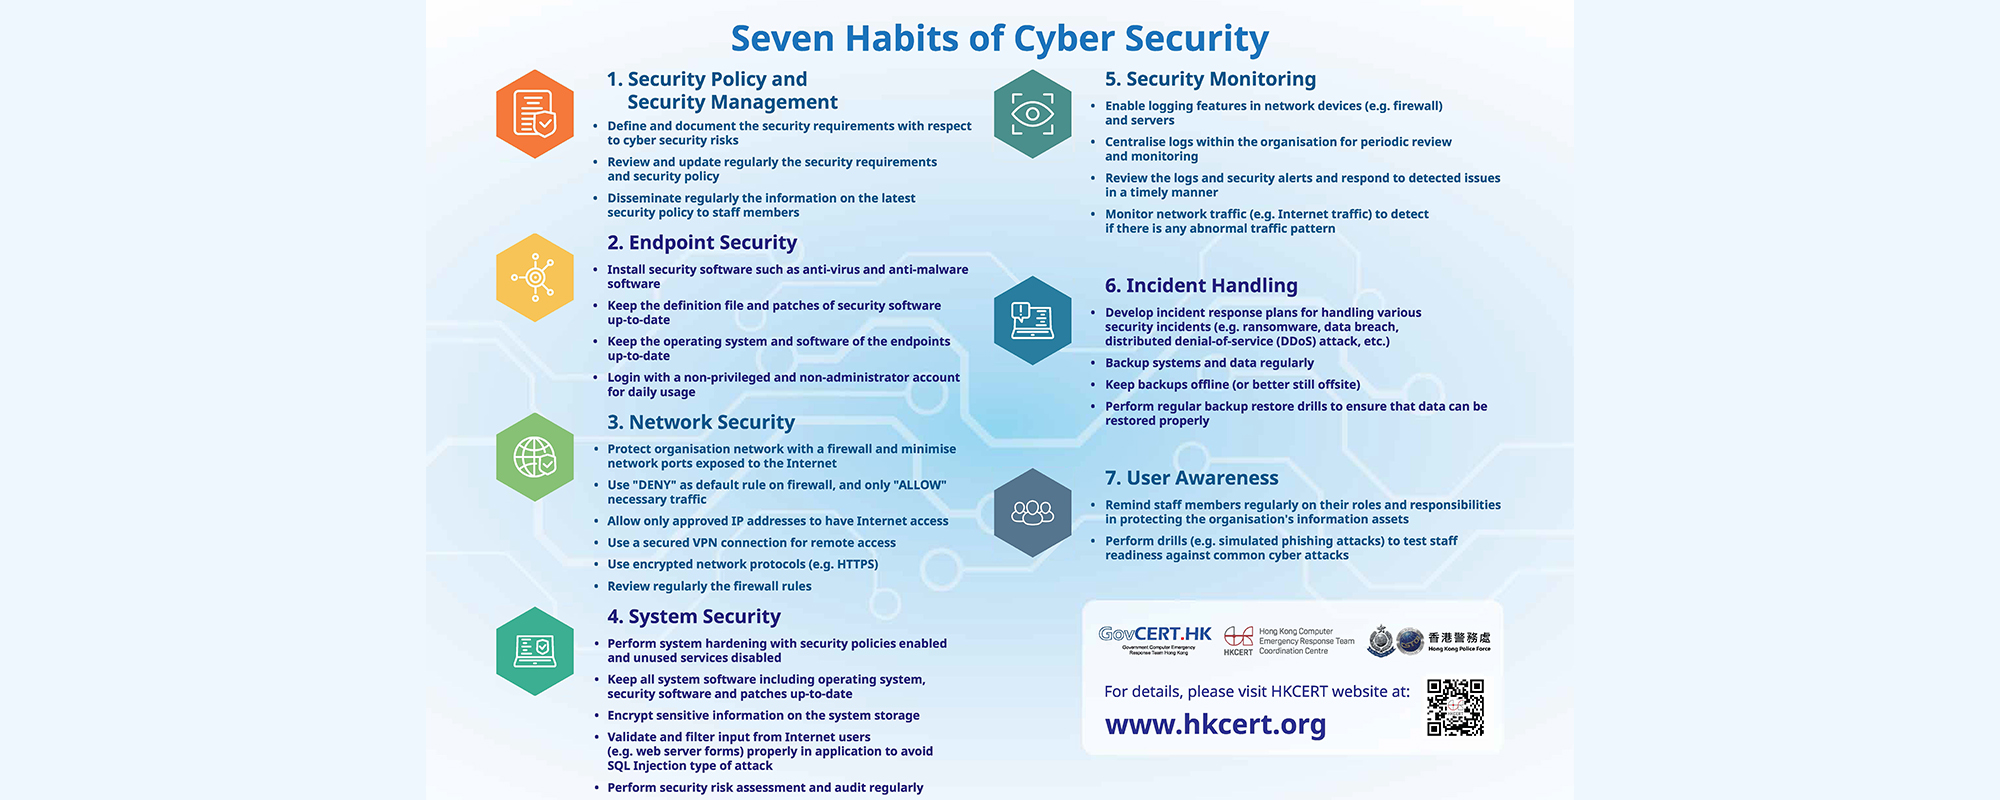 Infographics on “Seven Habits of Cyber Security”